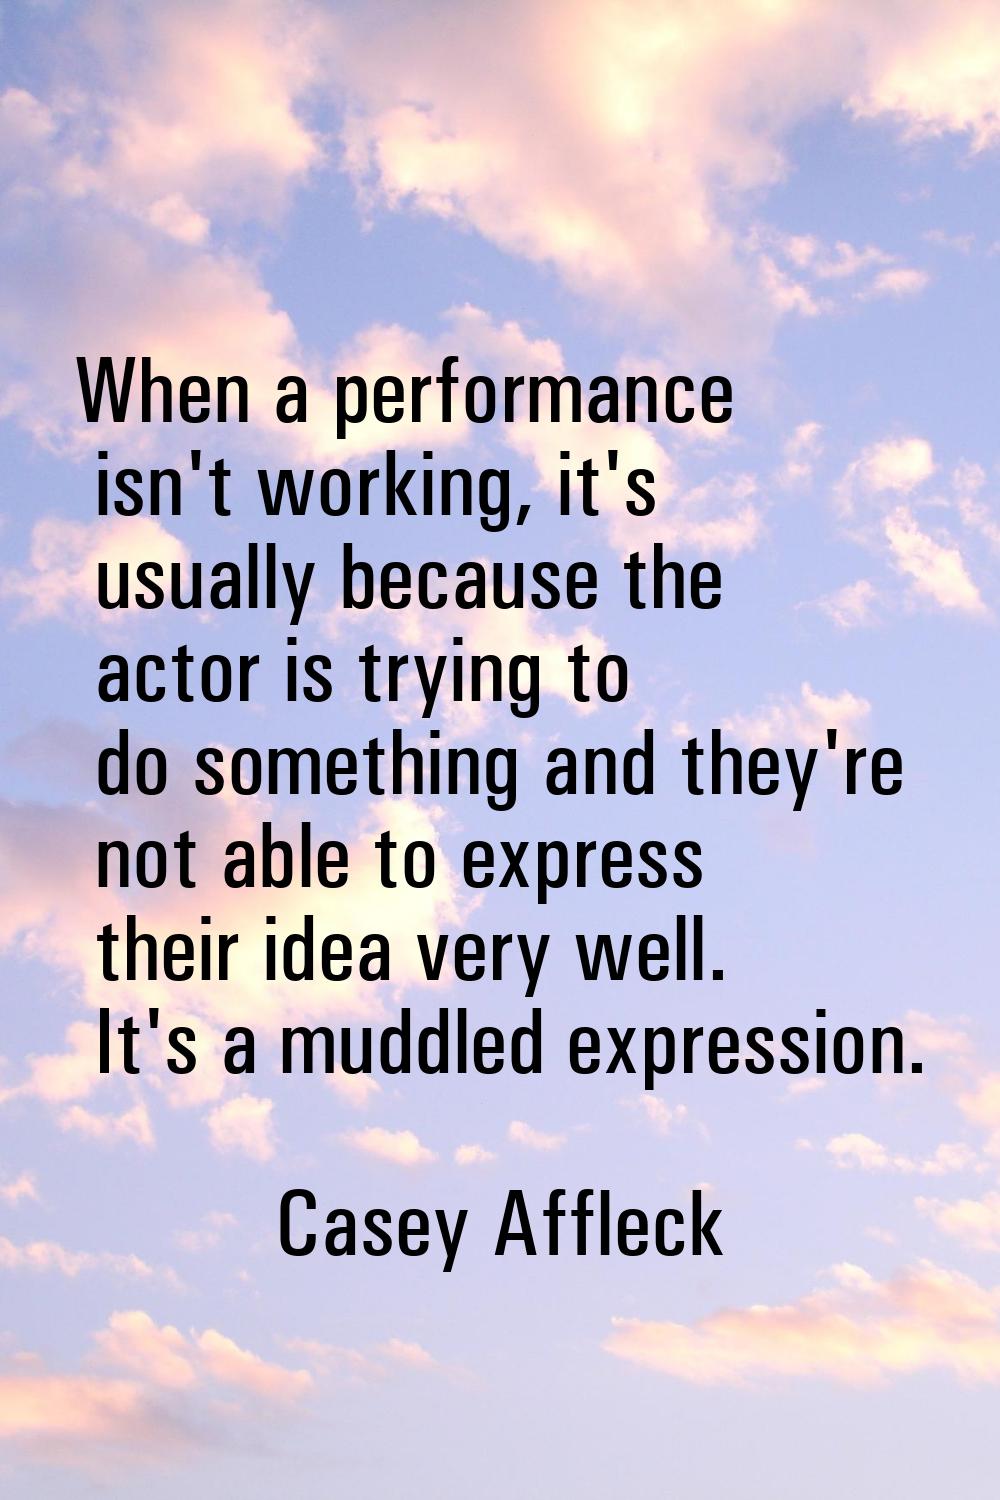 When a performance isn't working, it's usually because the actor is trying to do something and they